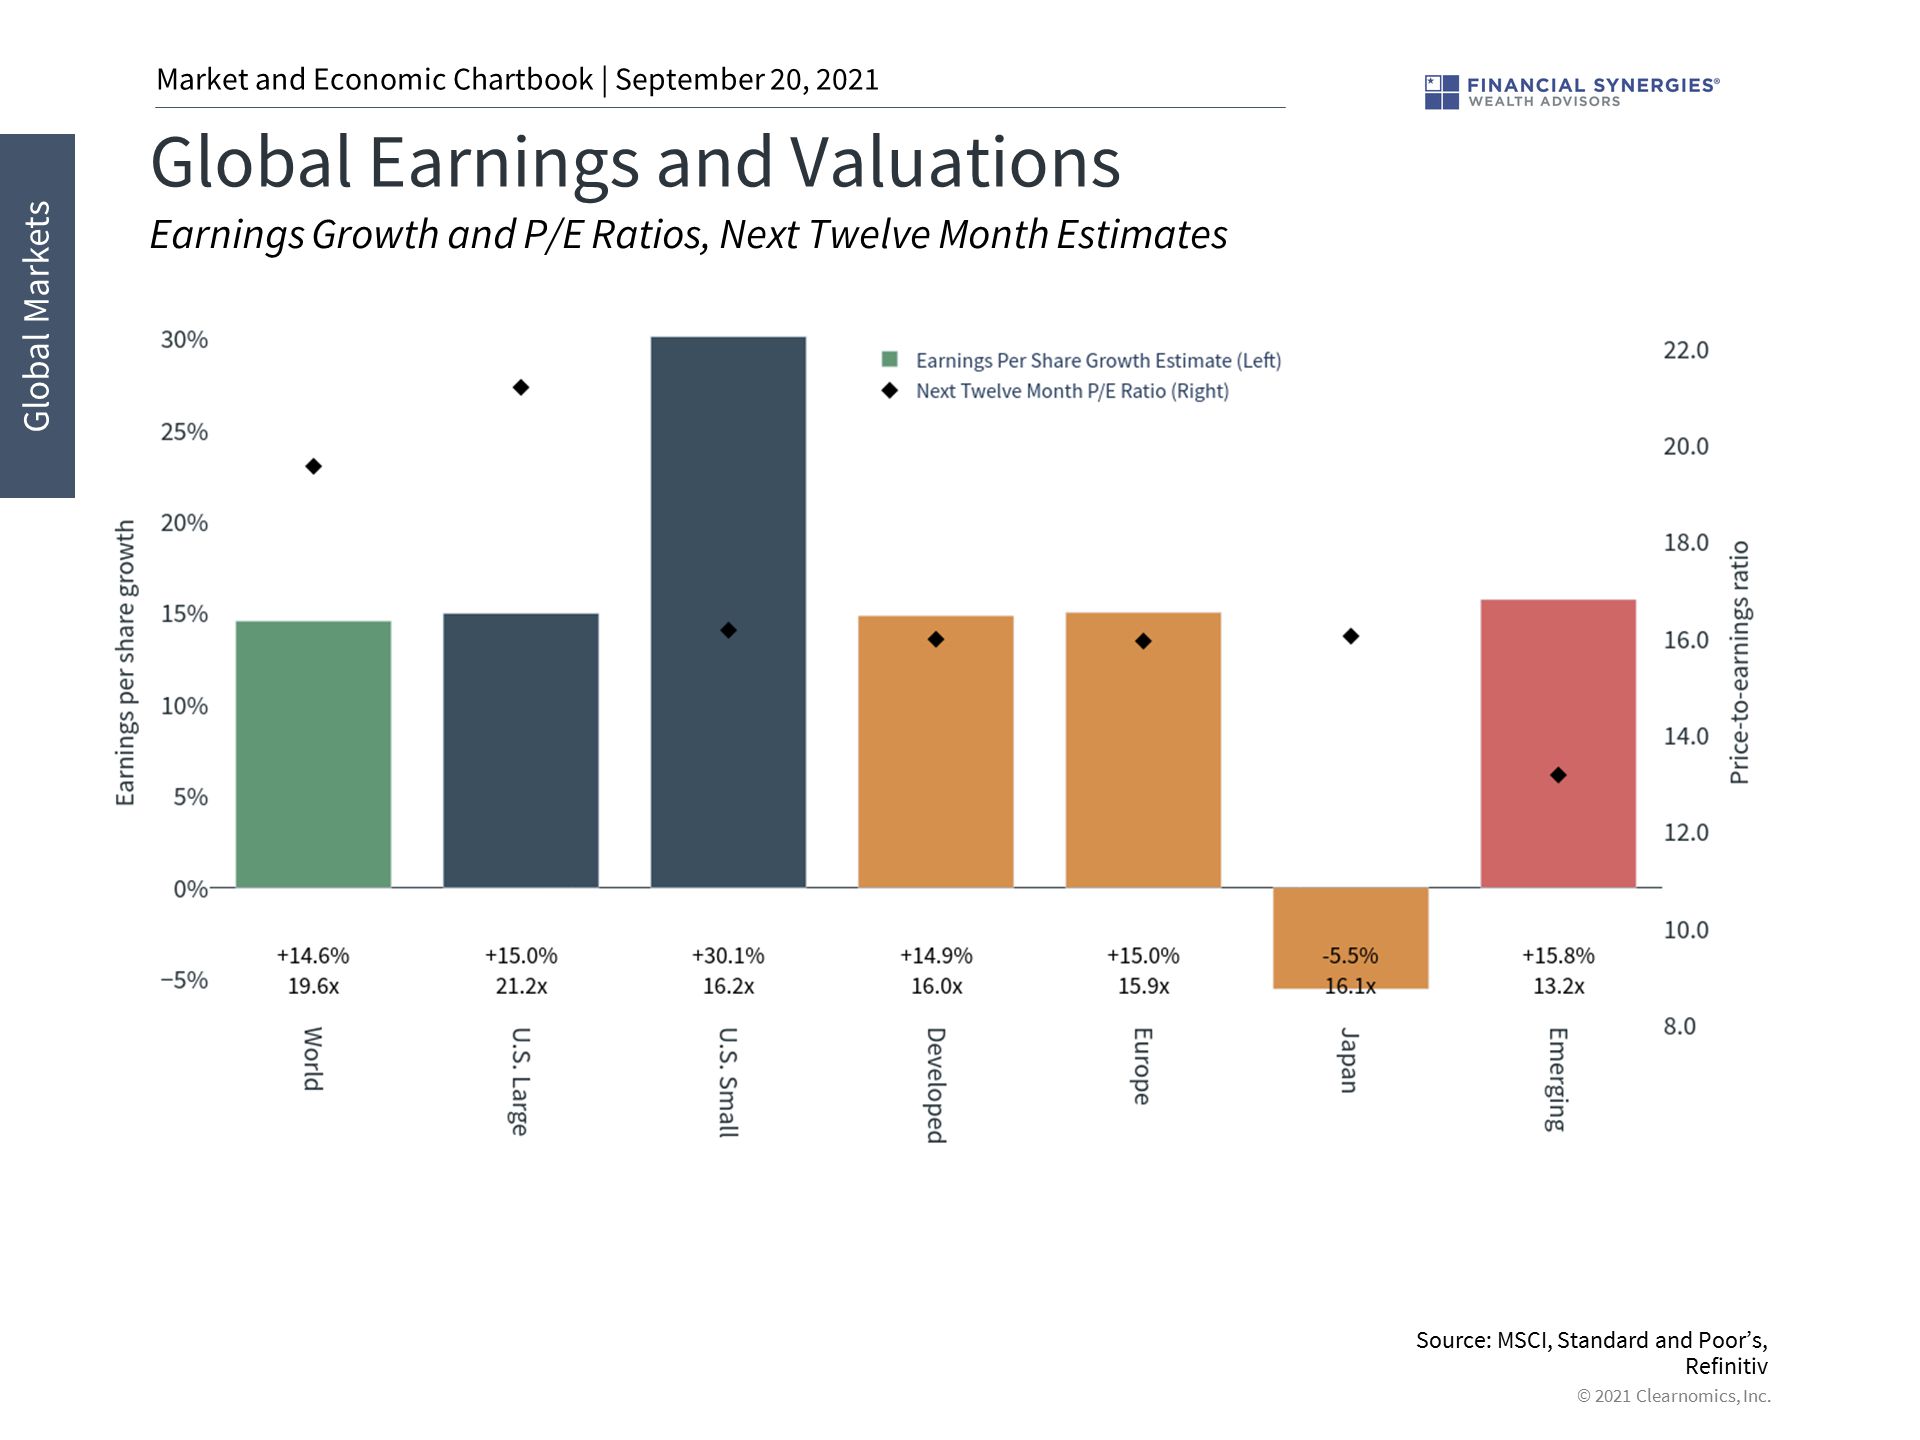 Global Earnings and Valuations